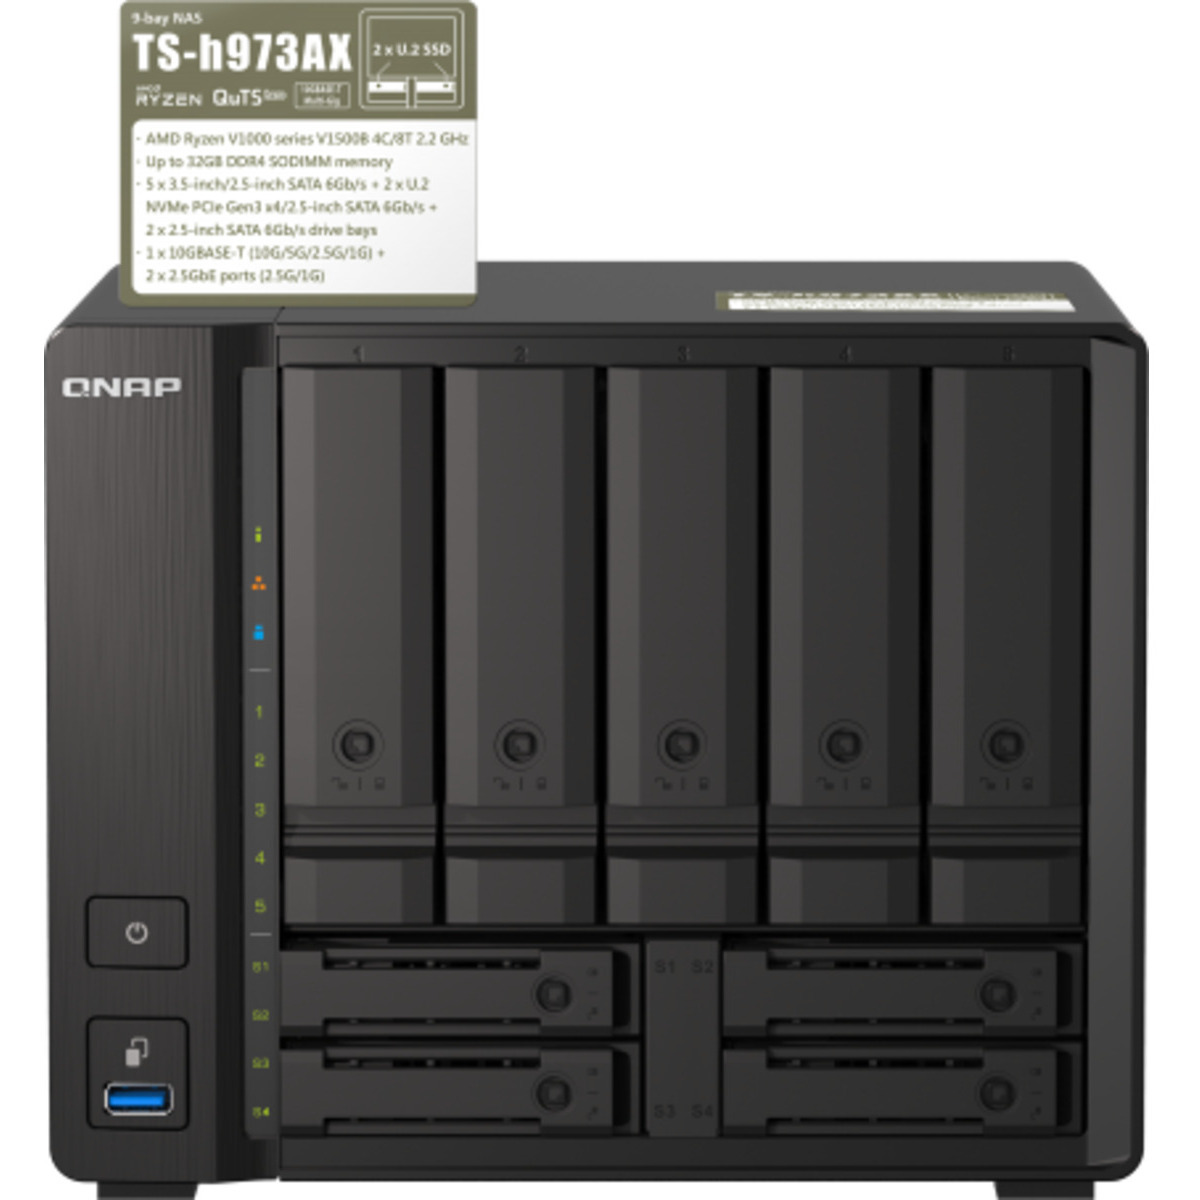 QNAP TS-h973AX  48tb 5+4-Bay Desktop Multimedia / Power User / Business NAS - Network Attached Storage Device 3x16tb Western Digital Ultrastar DC HC550 WUH721816ALE6L4 3.5 7200rpm SATA 6Gb/s HDD ENTERPRISE Class Drives Installed - Burn-In Tested TS-h973AX 